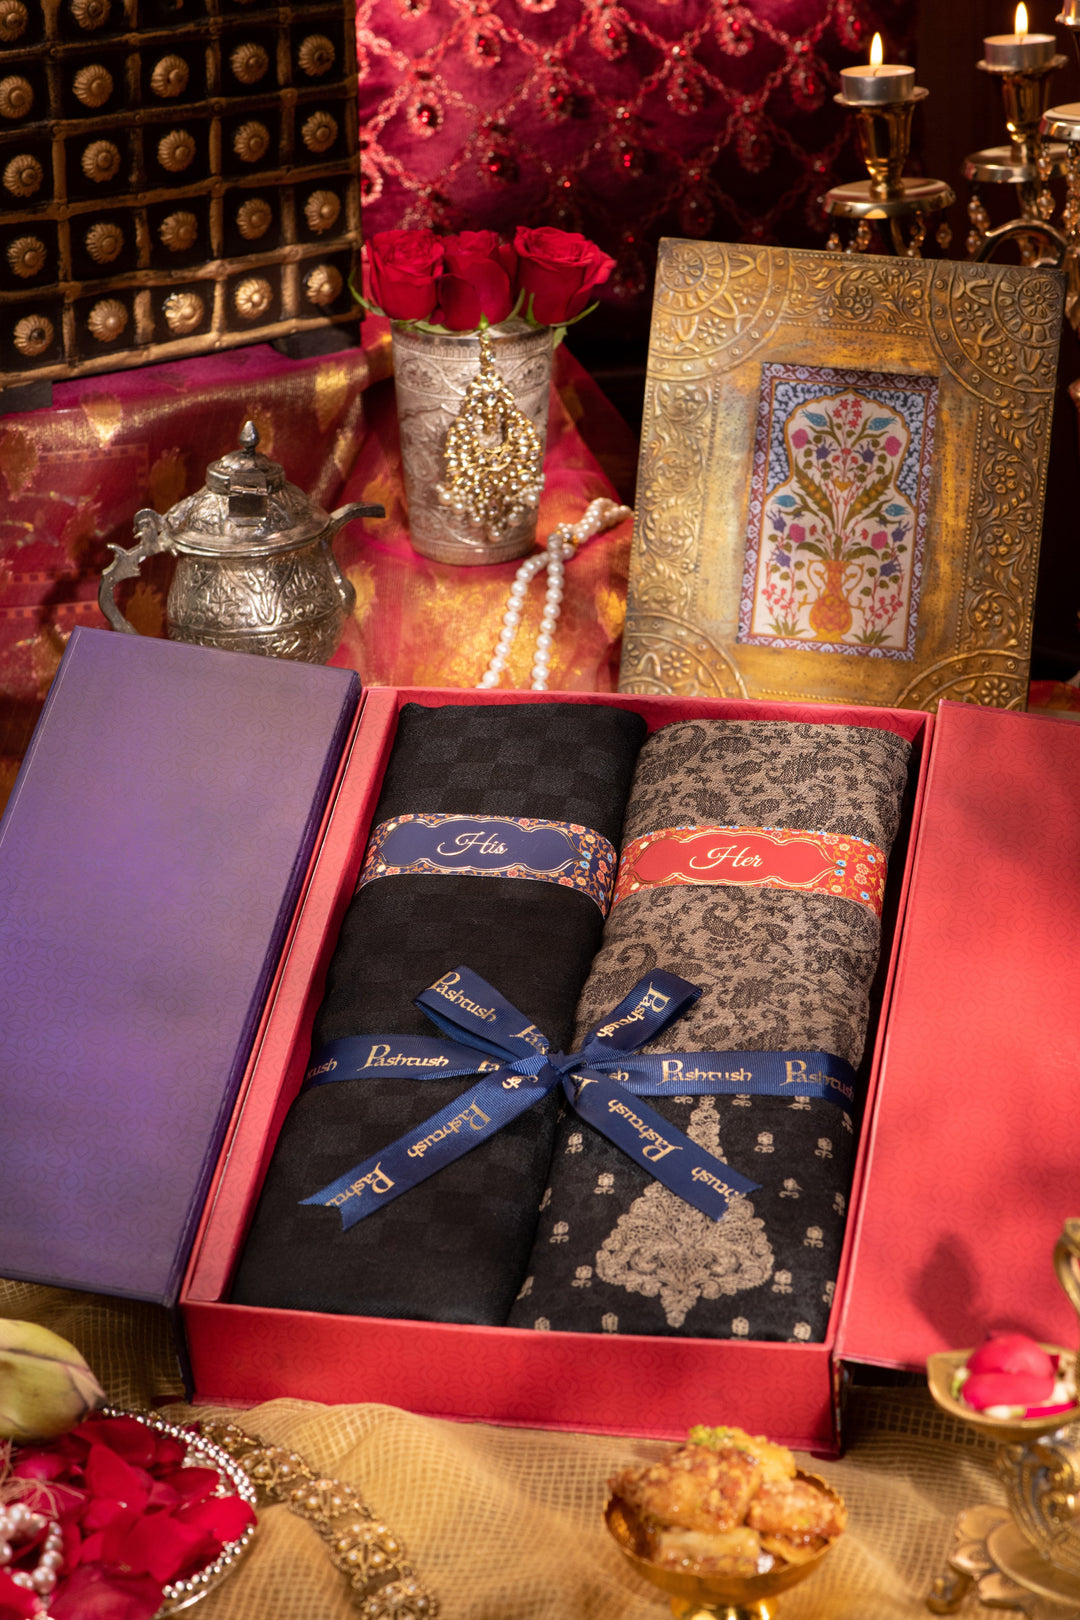 Pashtush India Gift Pack Pashtush His And Her Gift Set Of Checkered Stole And Embroidery Shawl With Premium Gift Box Packaging, Rich Black and Black